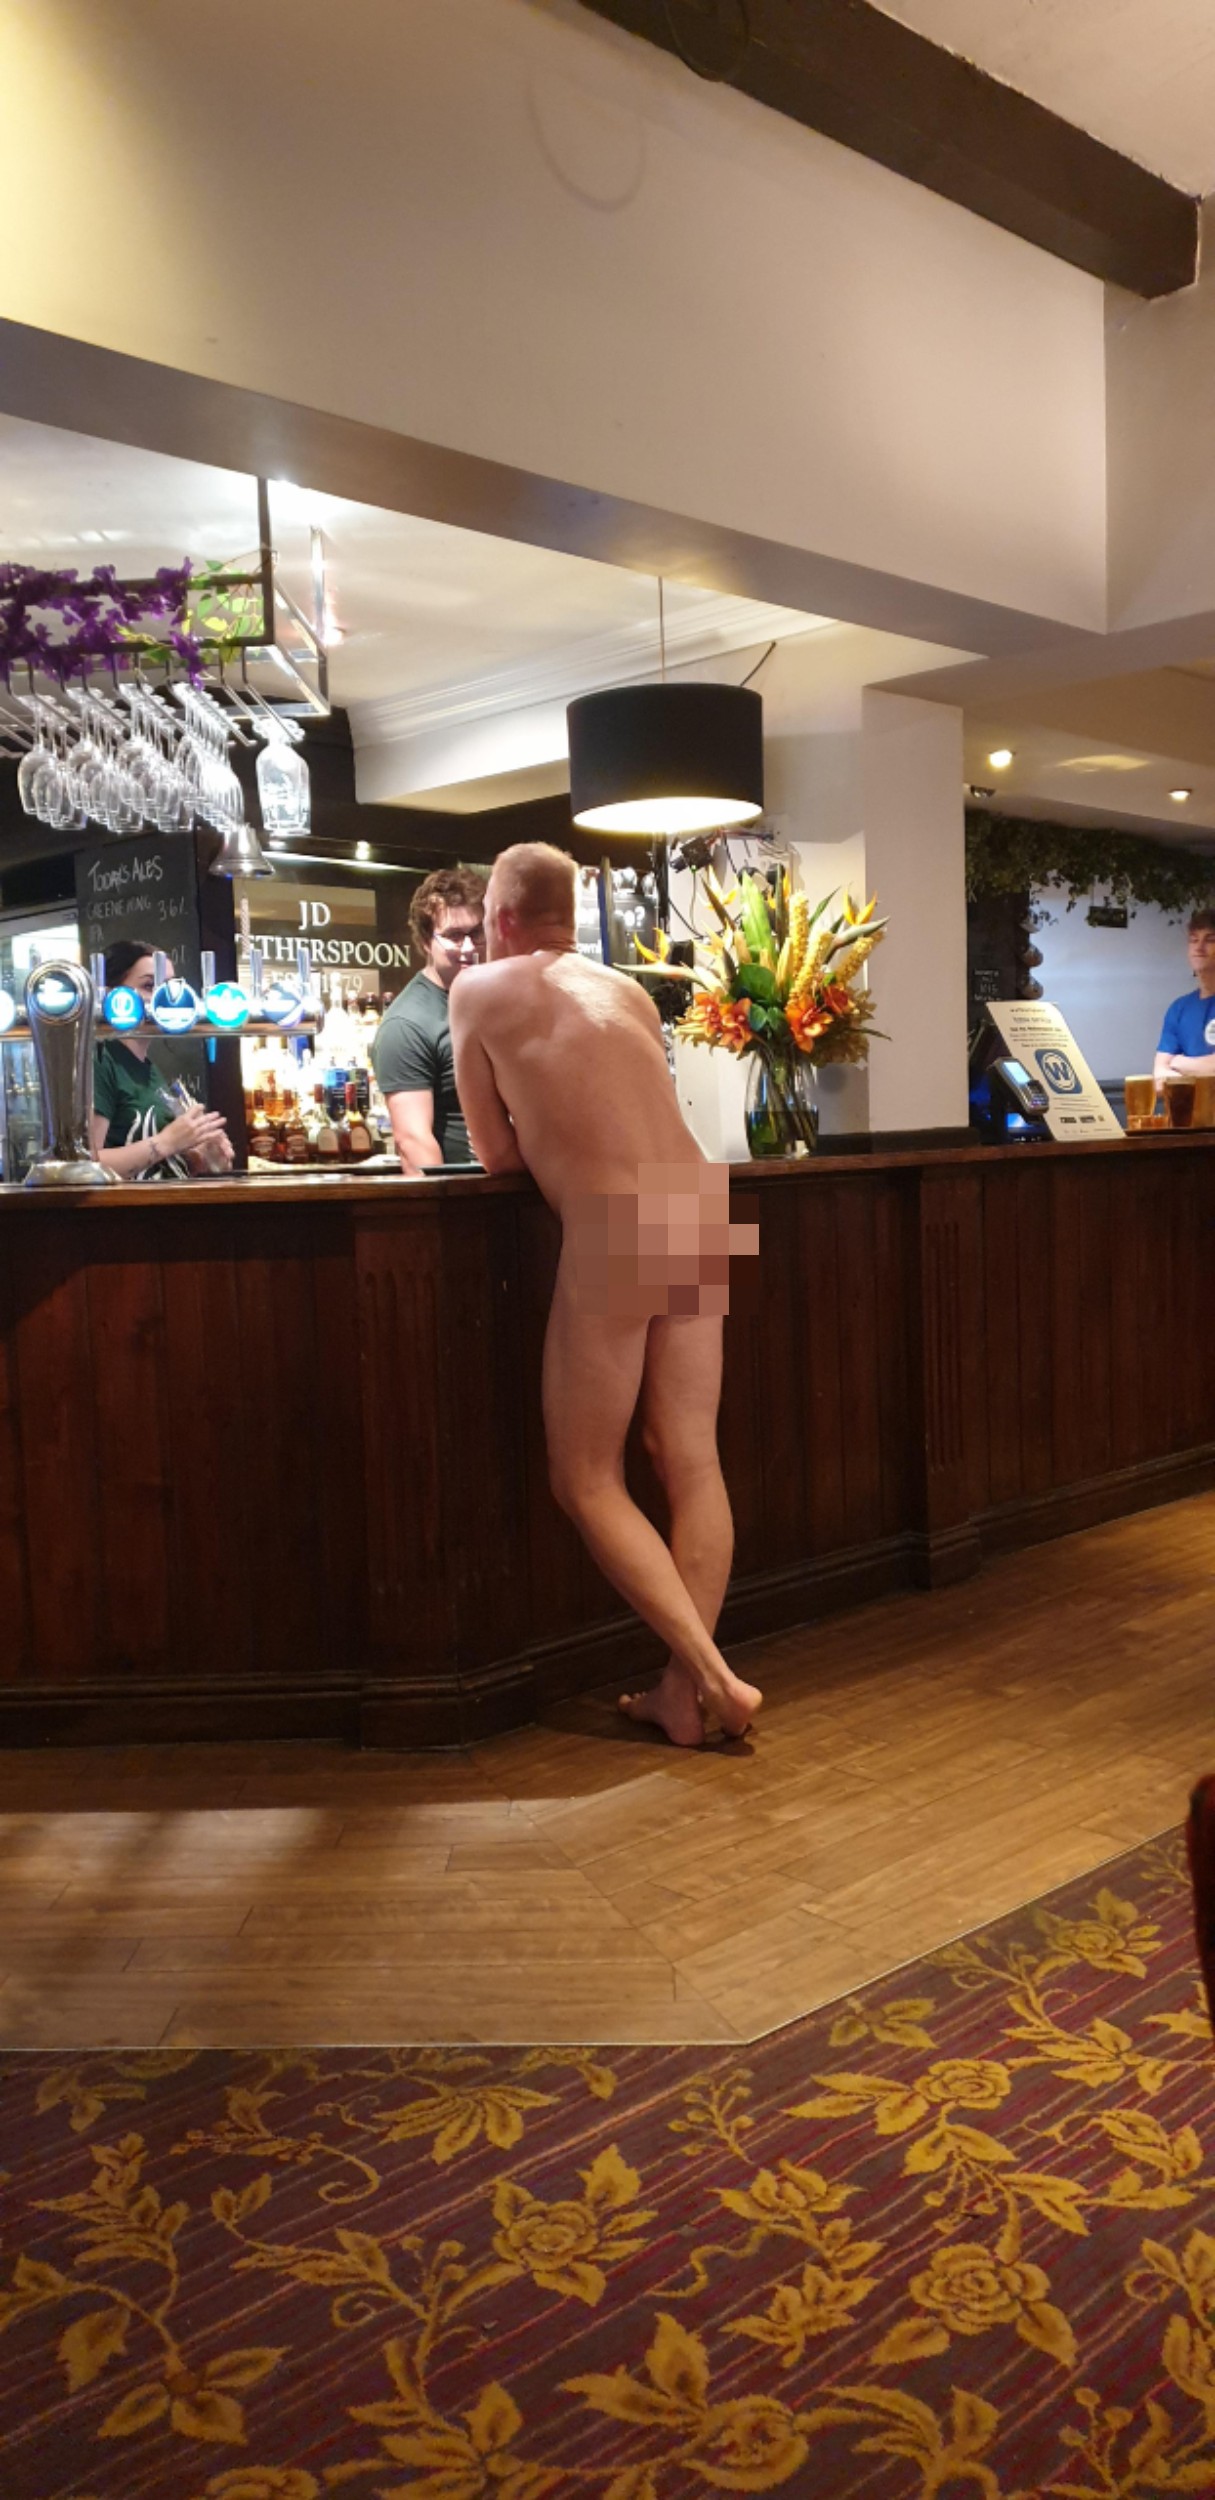 Naked man standing at Wetherspoons bar - UK and World News